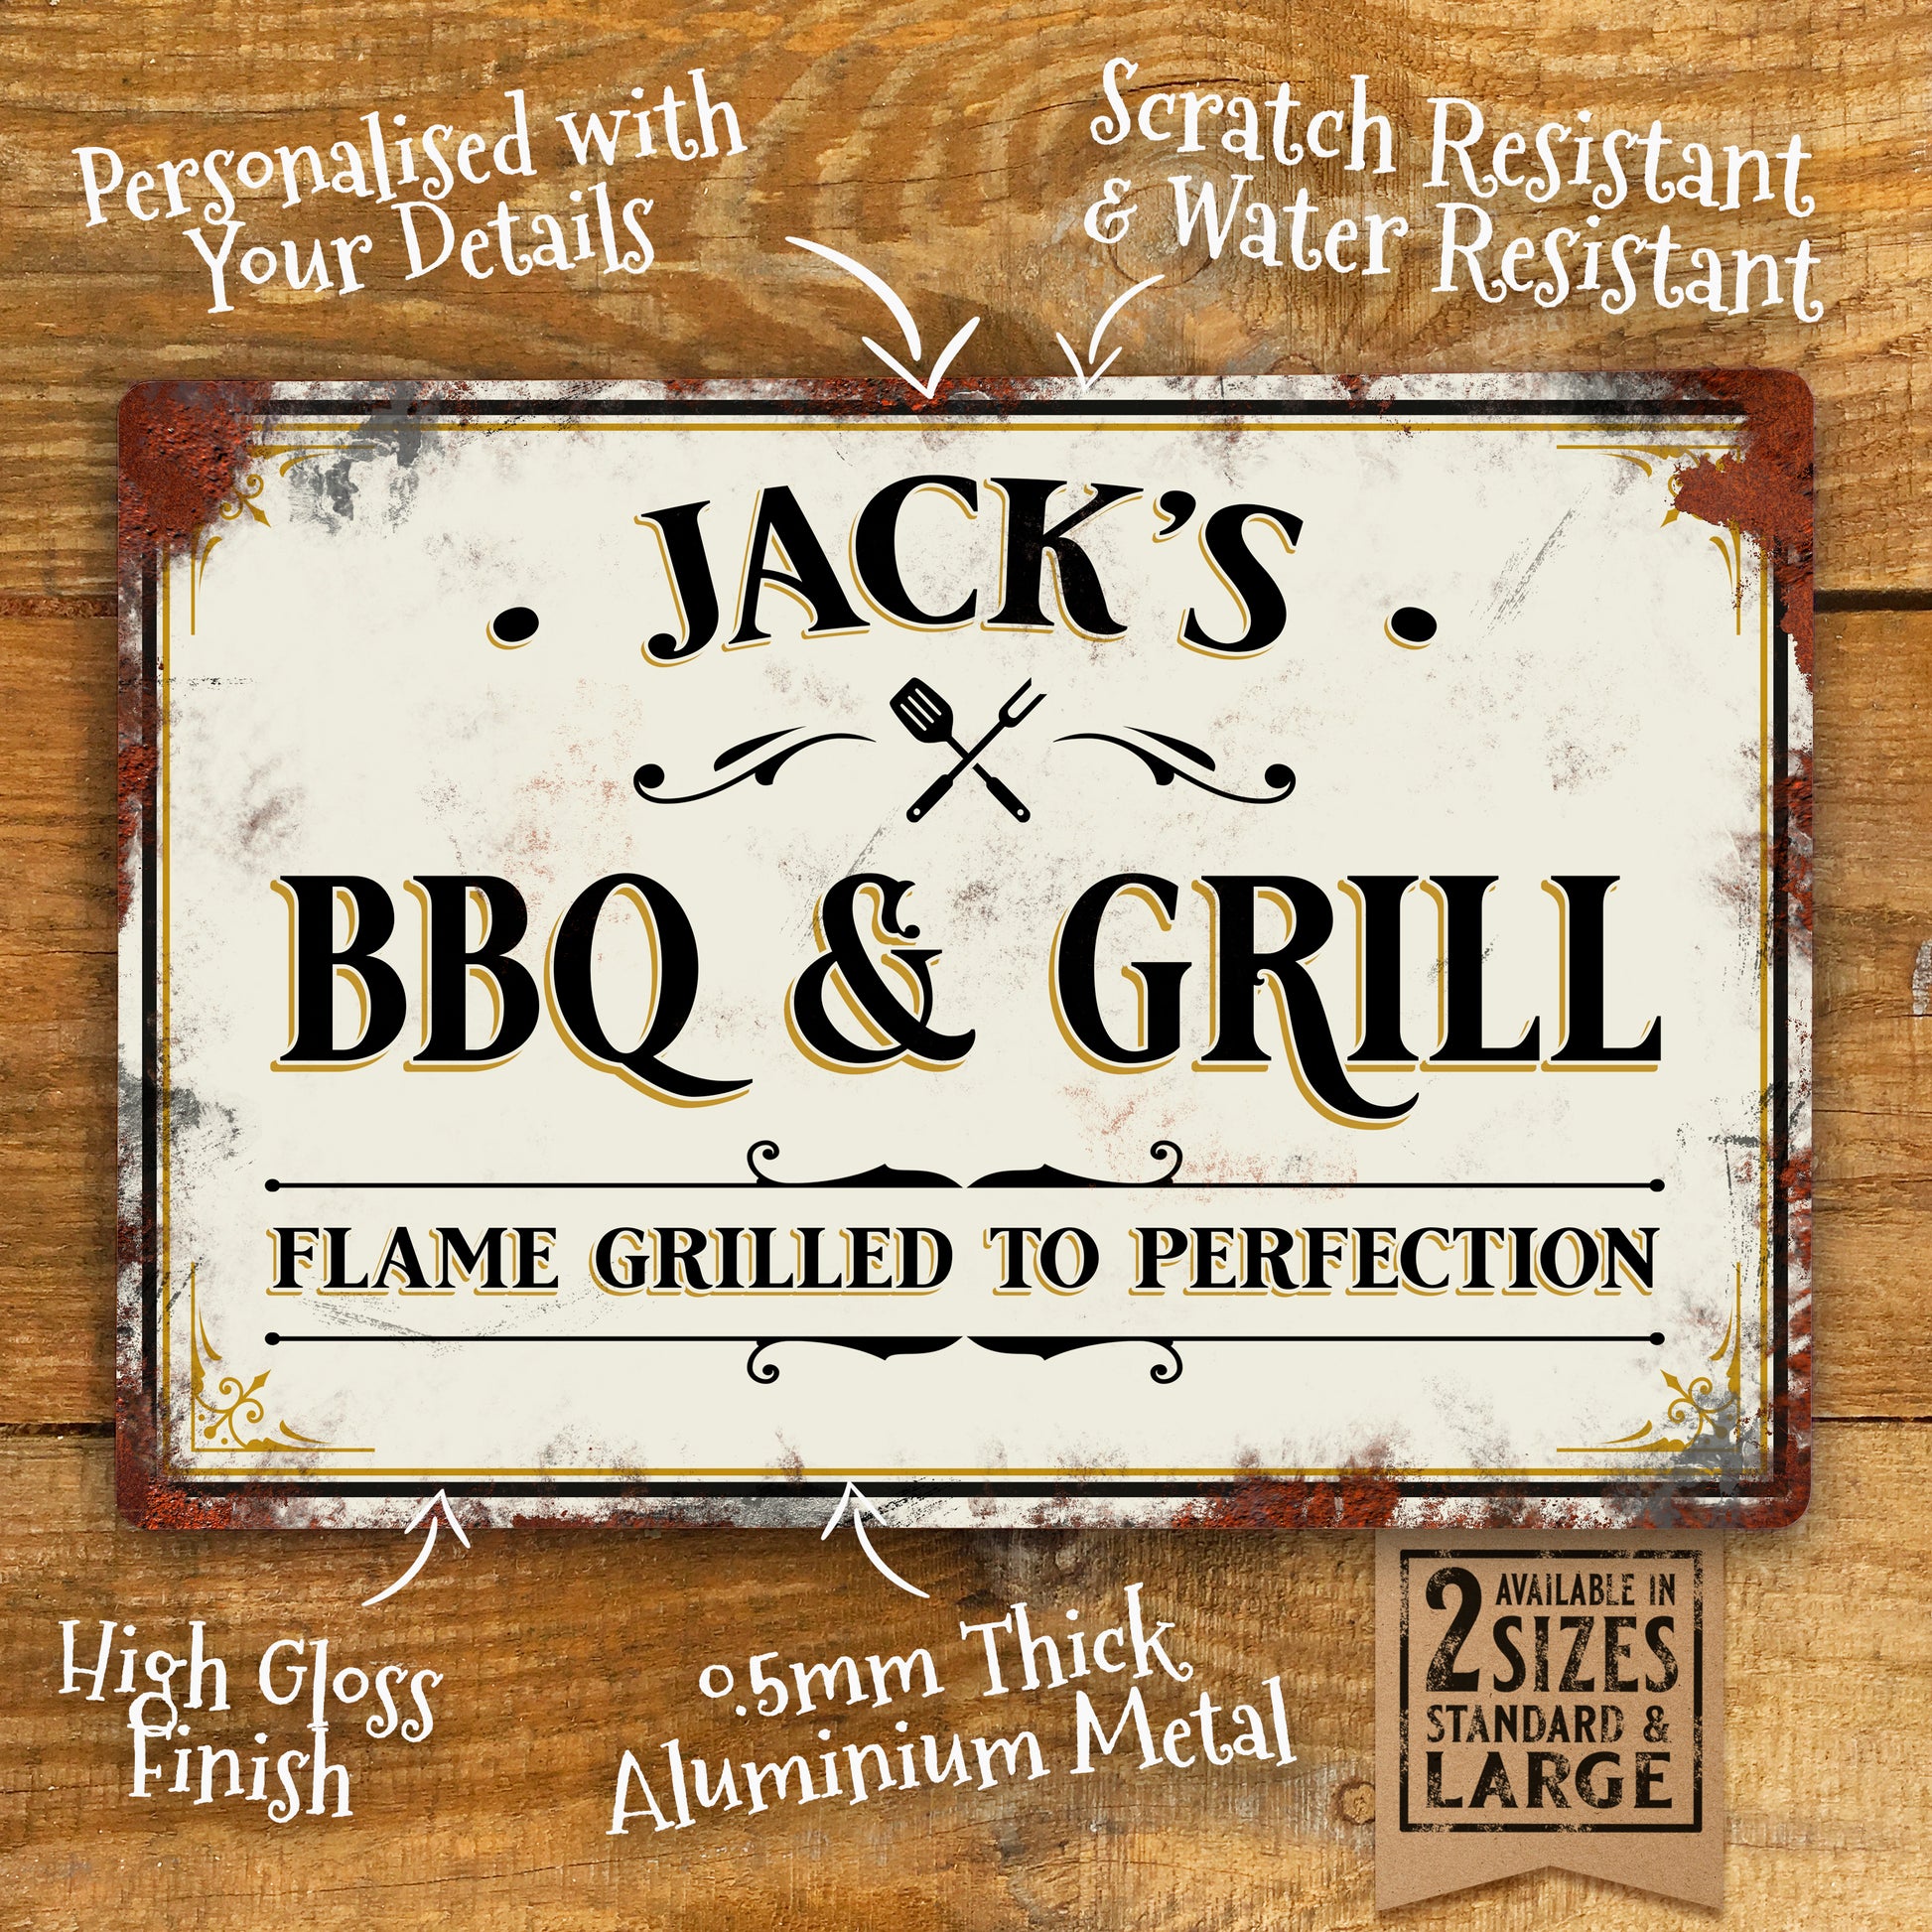 Personalised Gift - BBQ and Grill Vintage Retro Metal Sign details